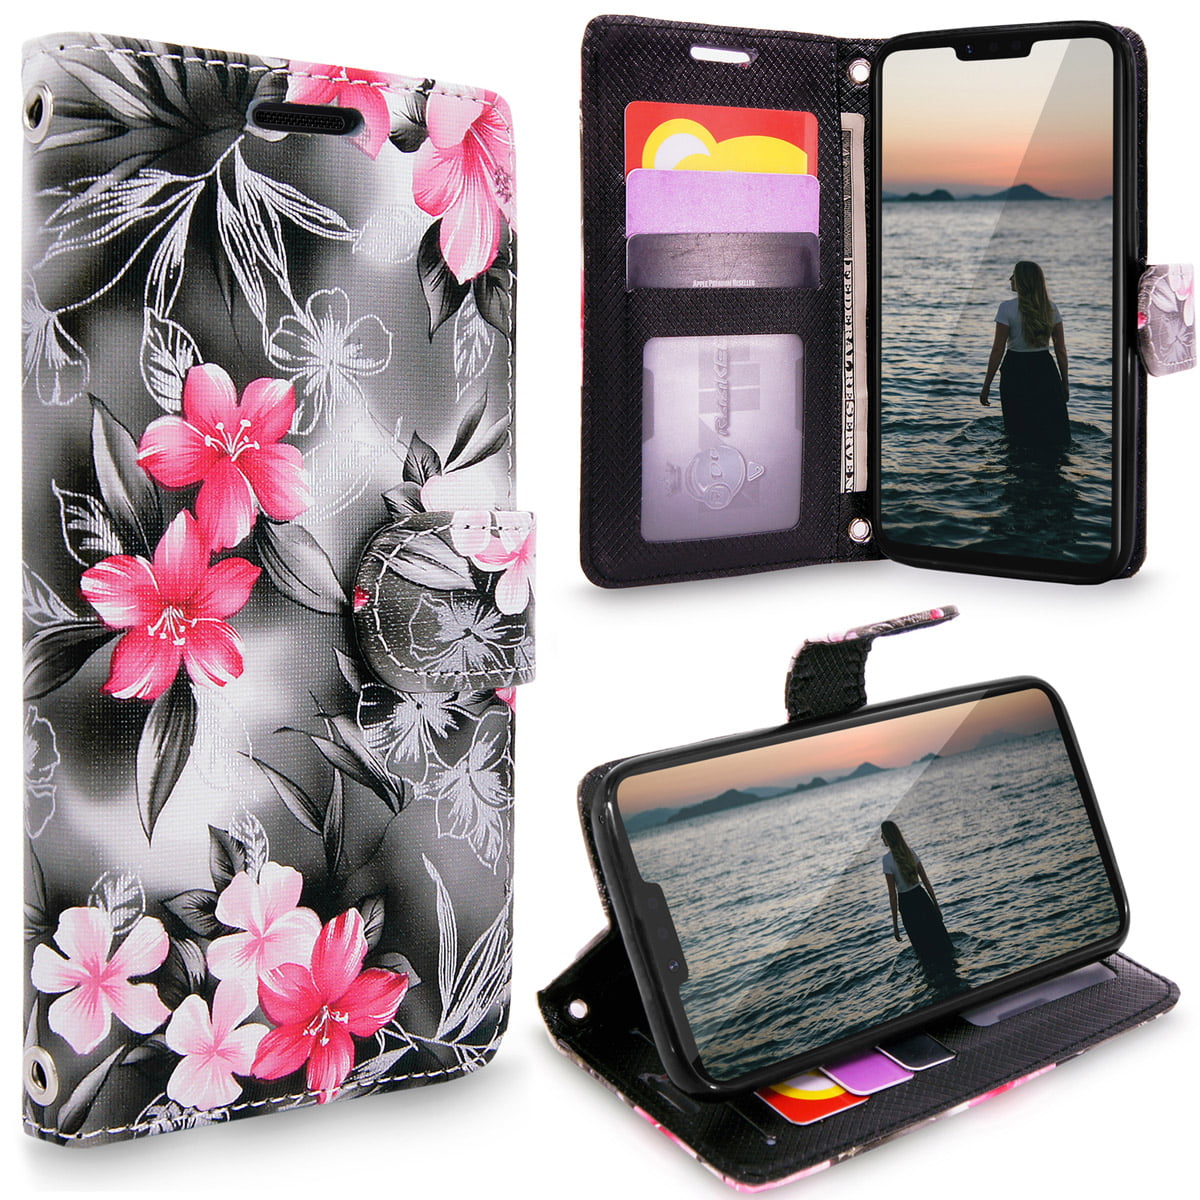 LG G8 ThinQ Case,LG G8 Case,LG G8 ThinQ PU Leather Wallet Embossed Floral Mandala Flowers Case with Kickstand Flip Cover Card Holder for LG G8 LG G8 ThinQ Purple 